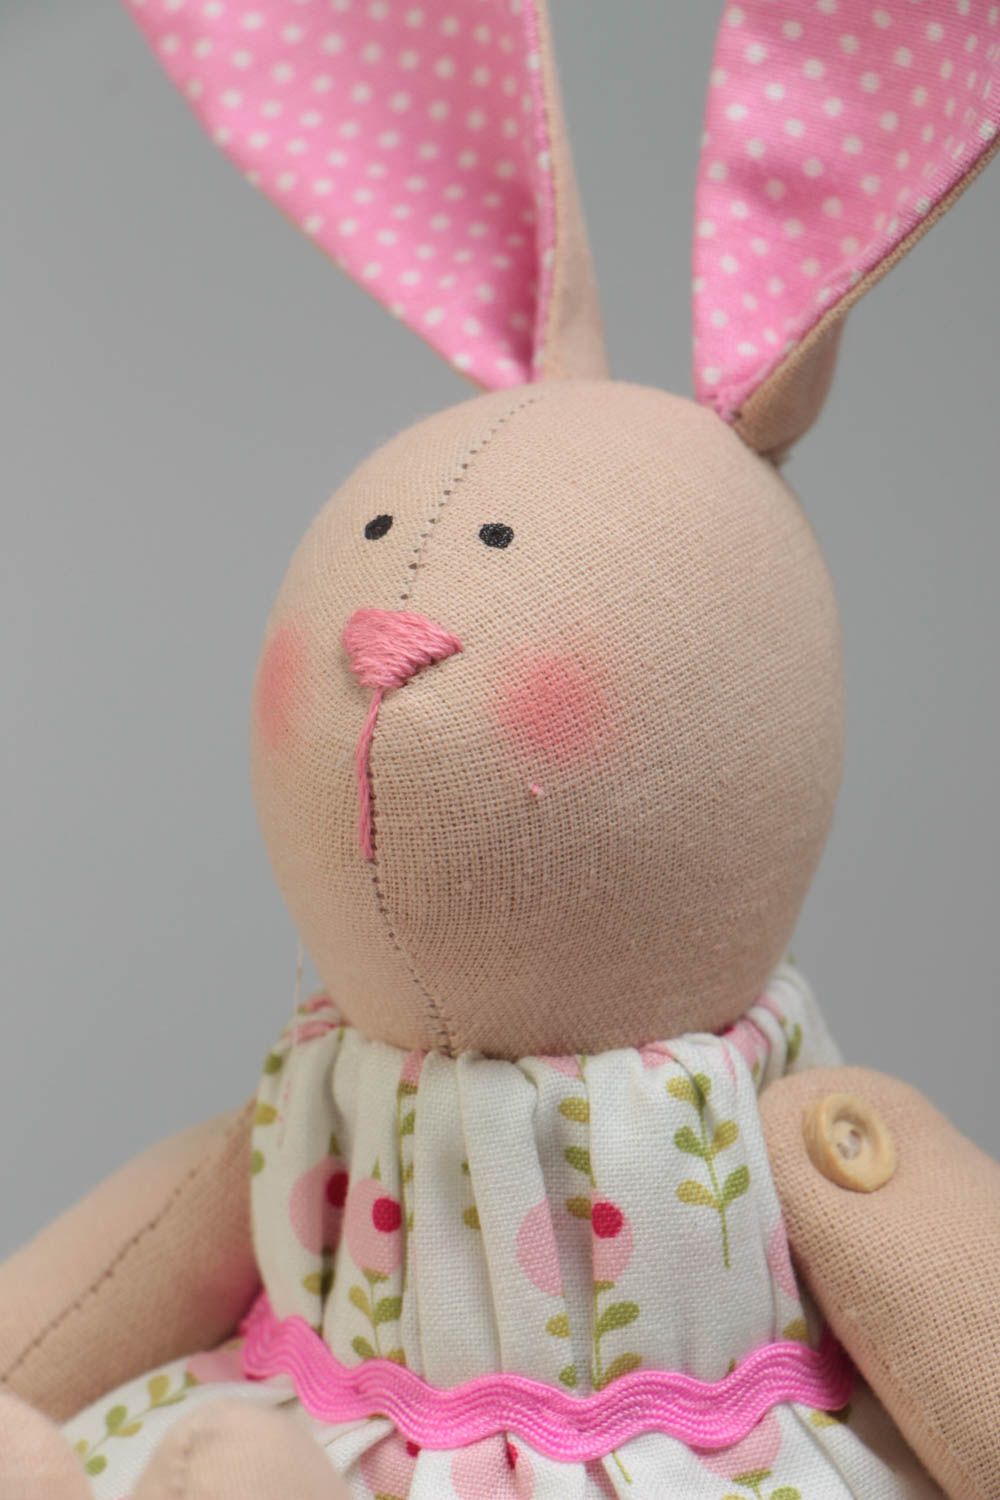 Handmade cotton fabric soft toy rabbit in floral dress with pink polka dot ears photo 3